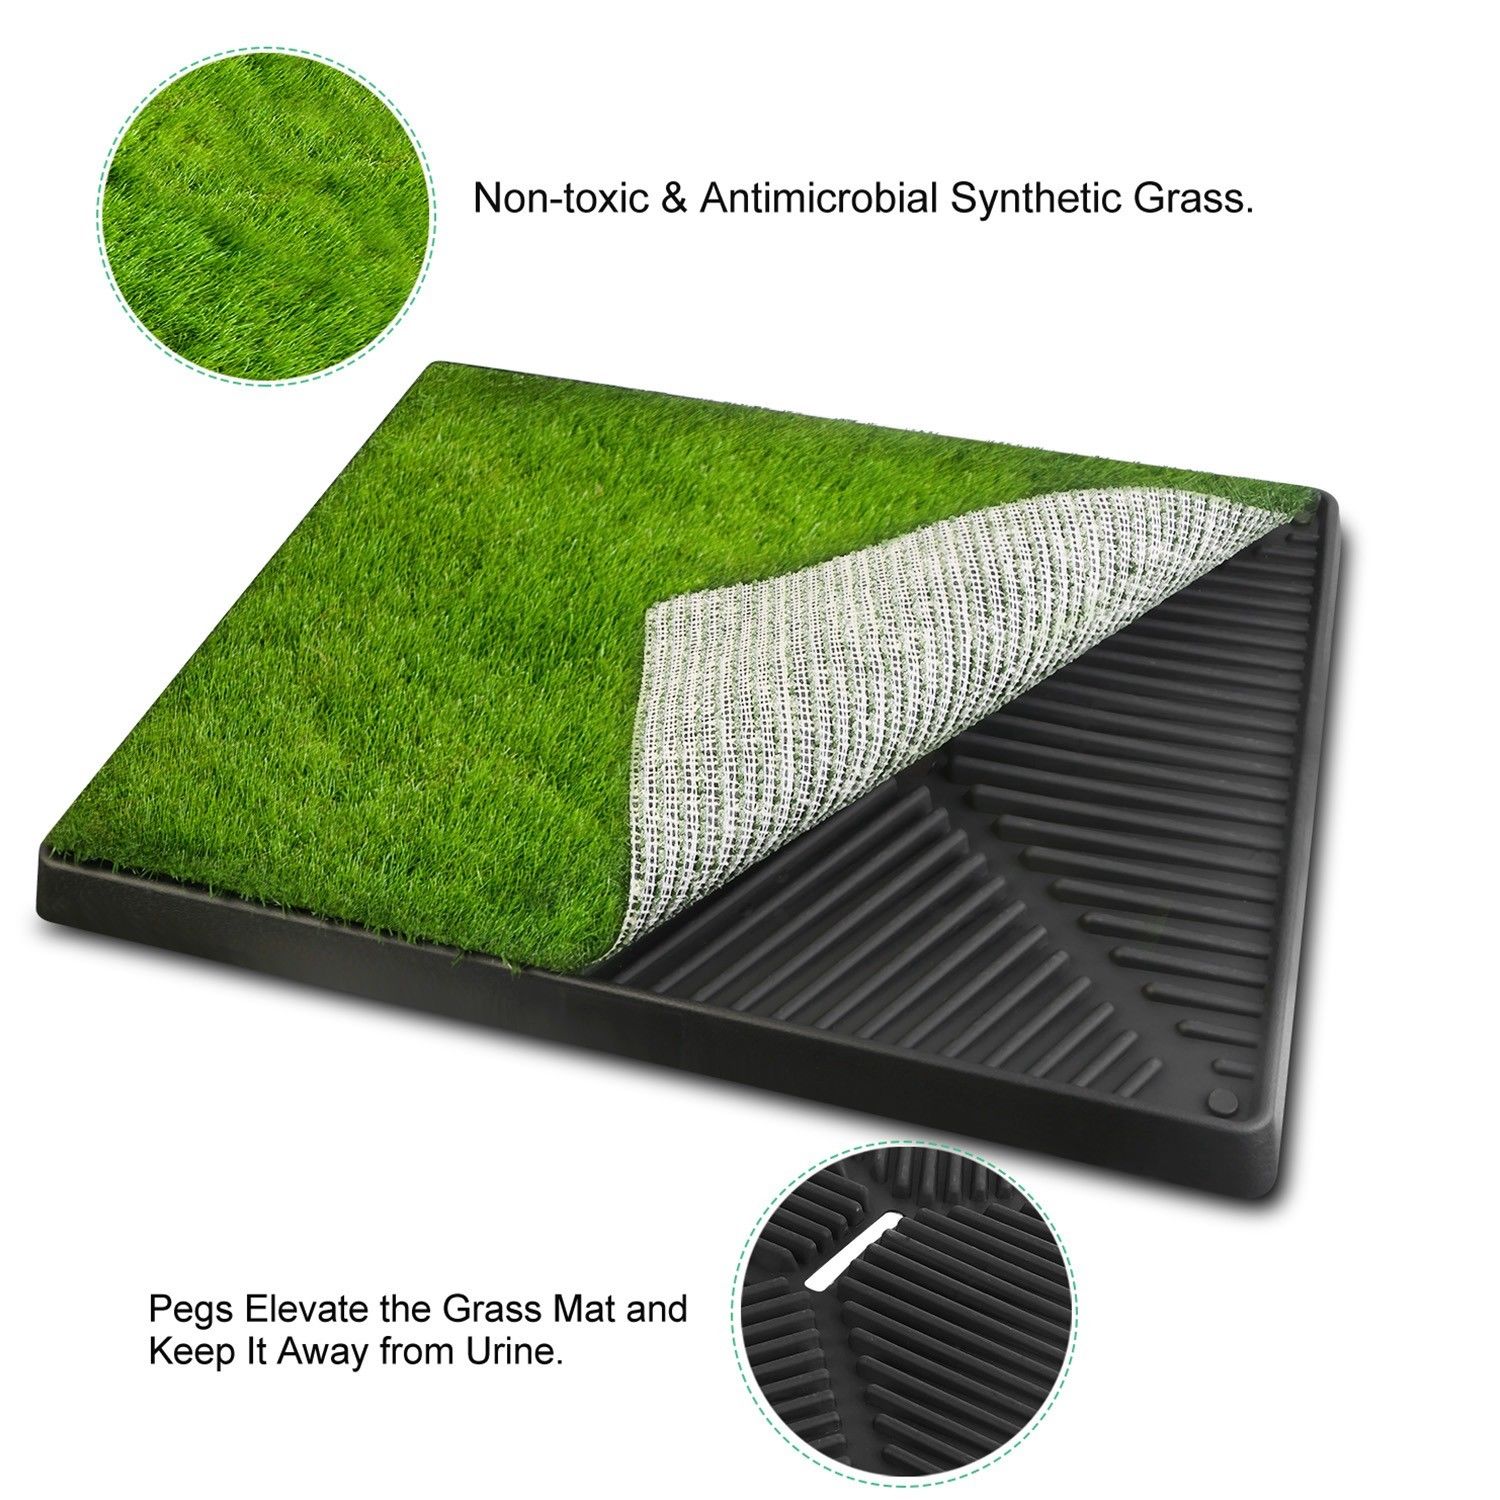 Pet Toilet Trainer Grass Mat for Puppy Potty Training - Non Toxic